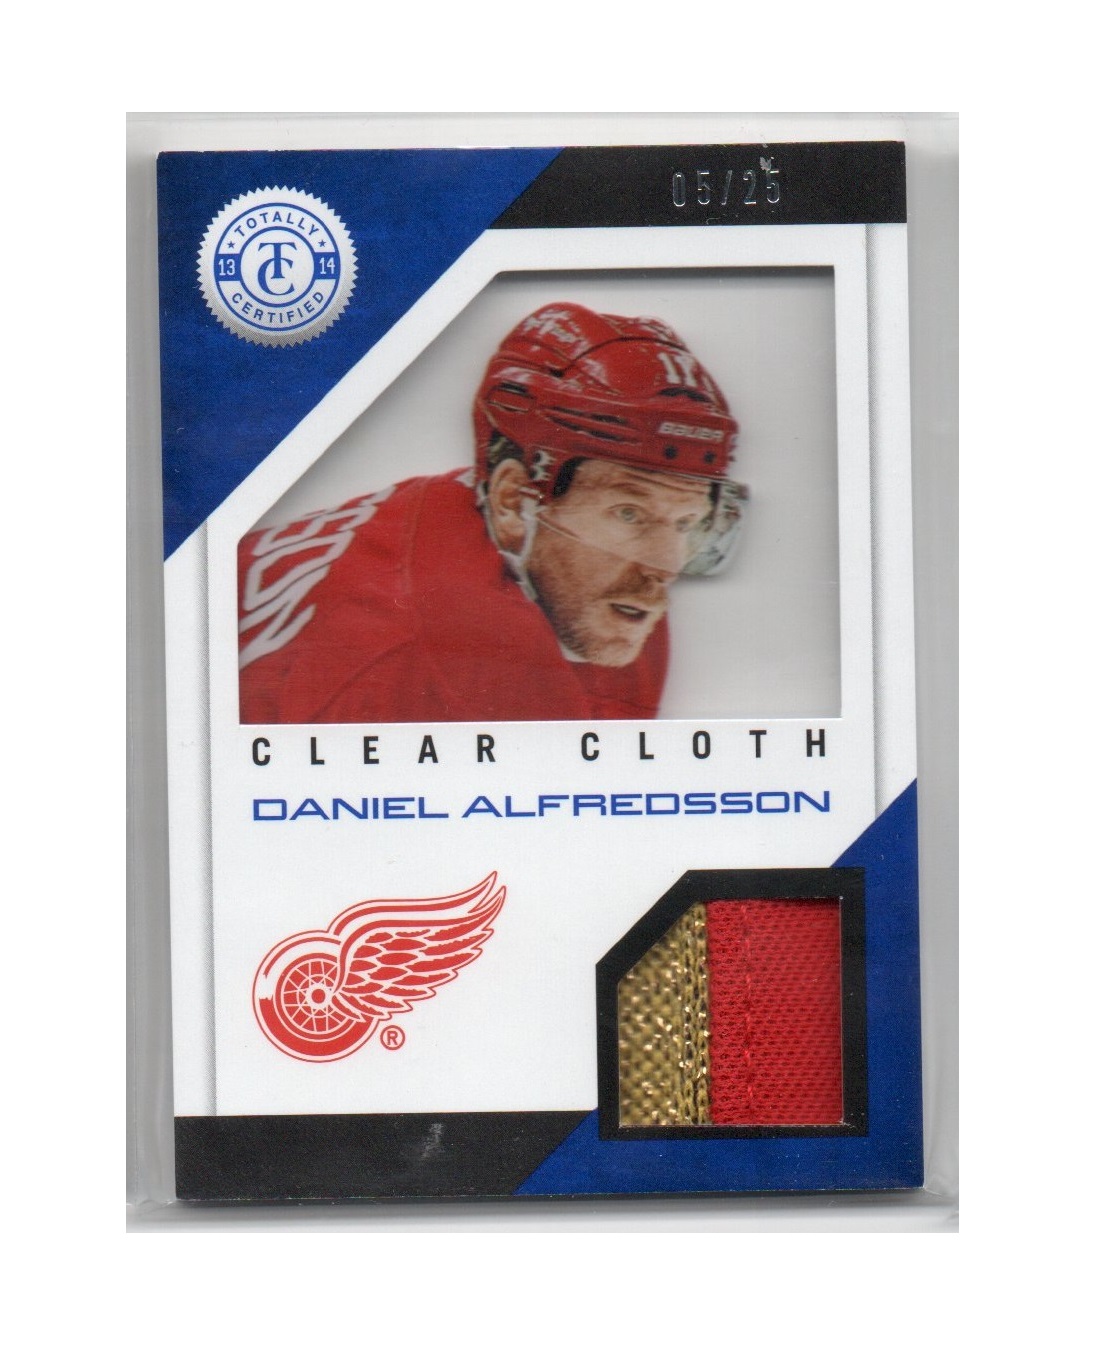 2013-14 Totally Certified Clear Cloth Jerseys Prime Blue #CLDAL Daniel Alfredsson (60-X184-RED WINGS)